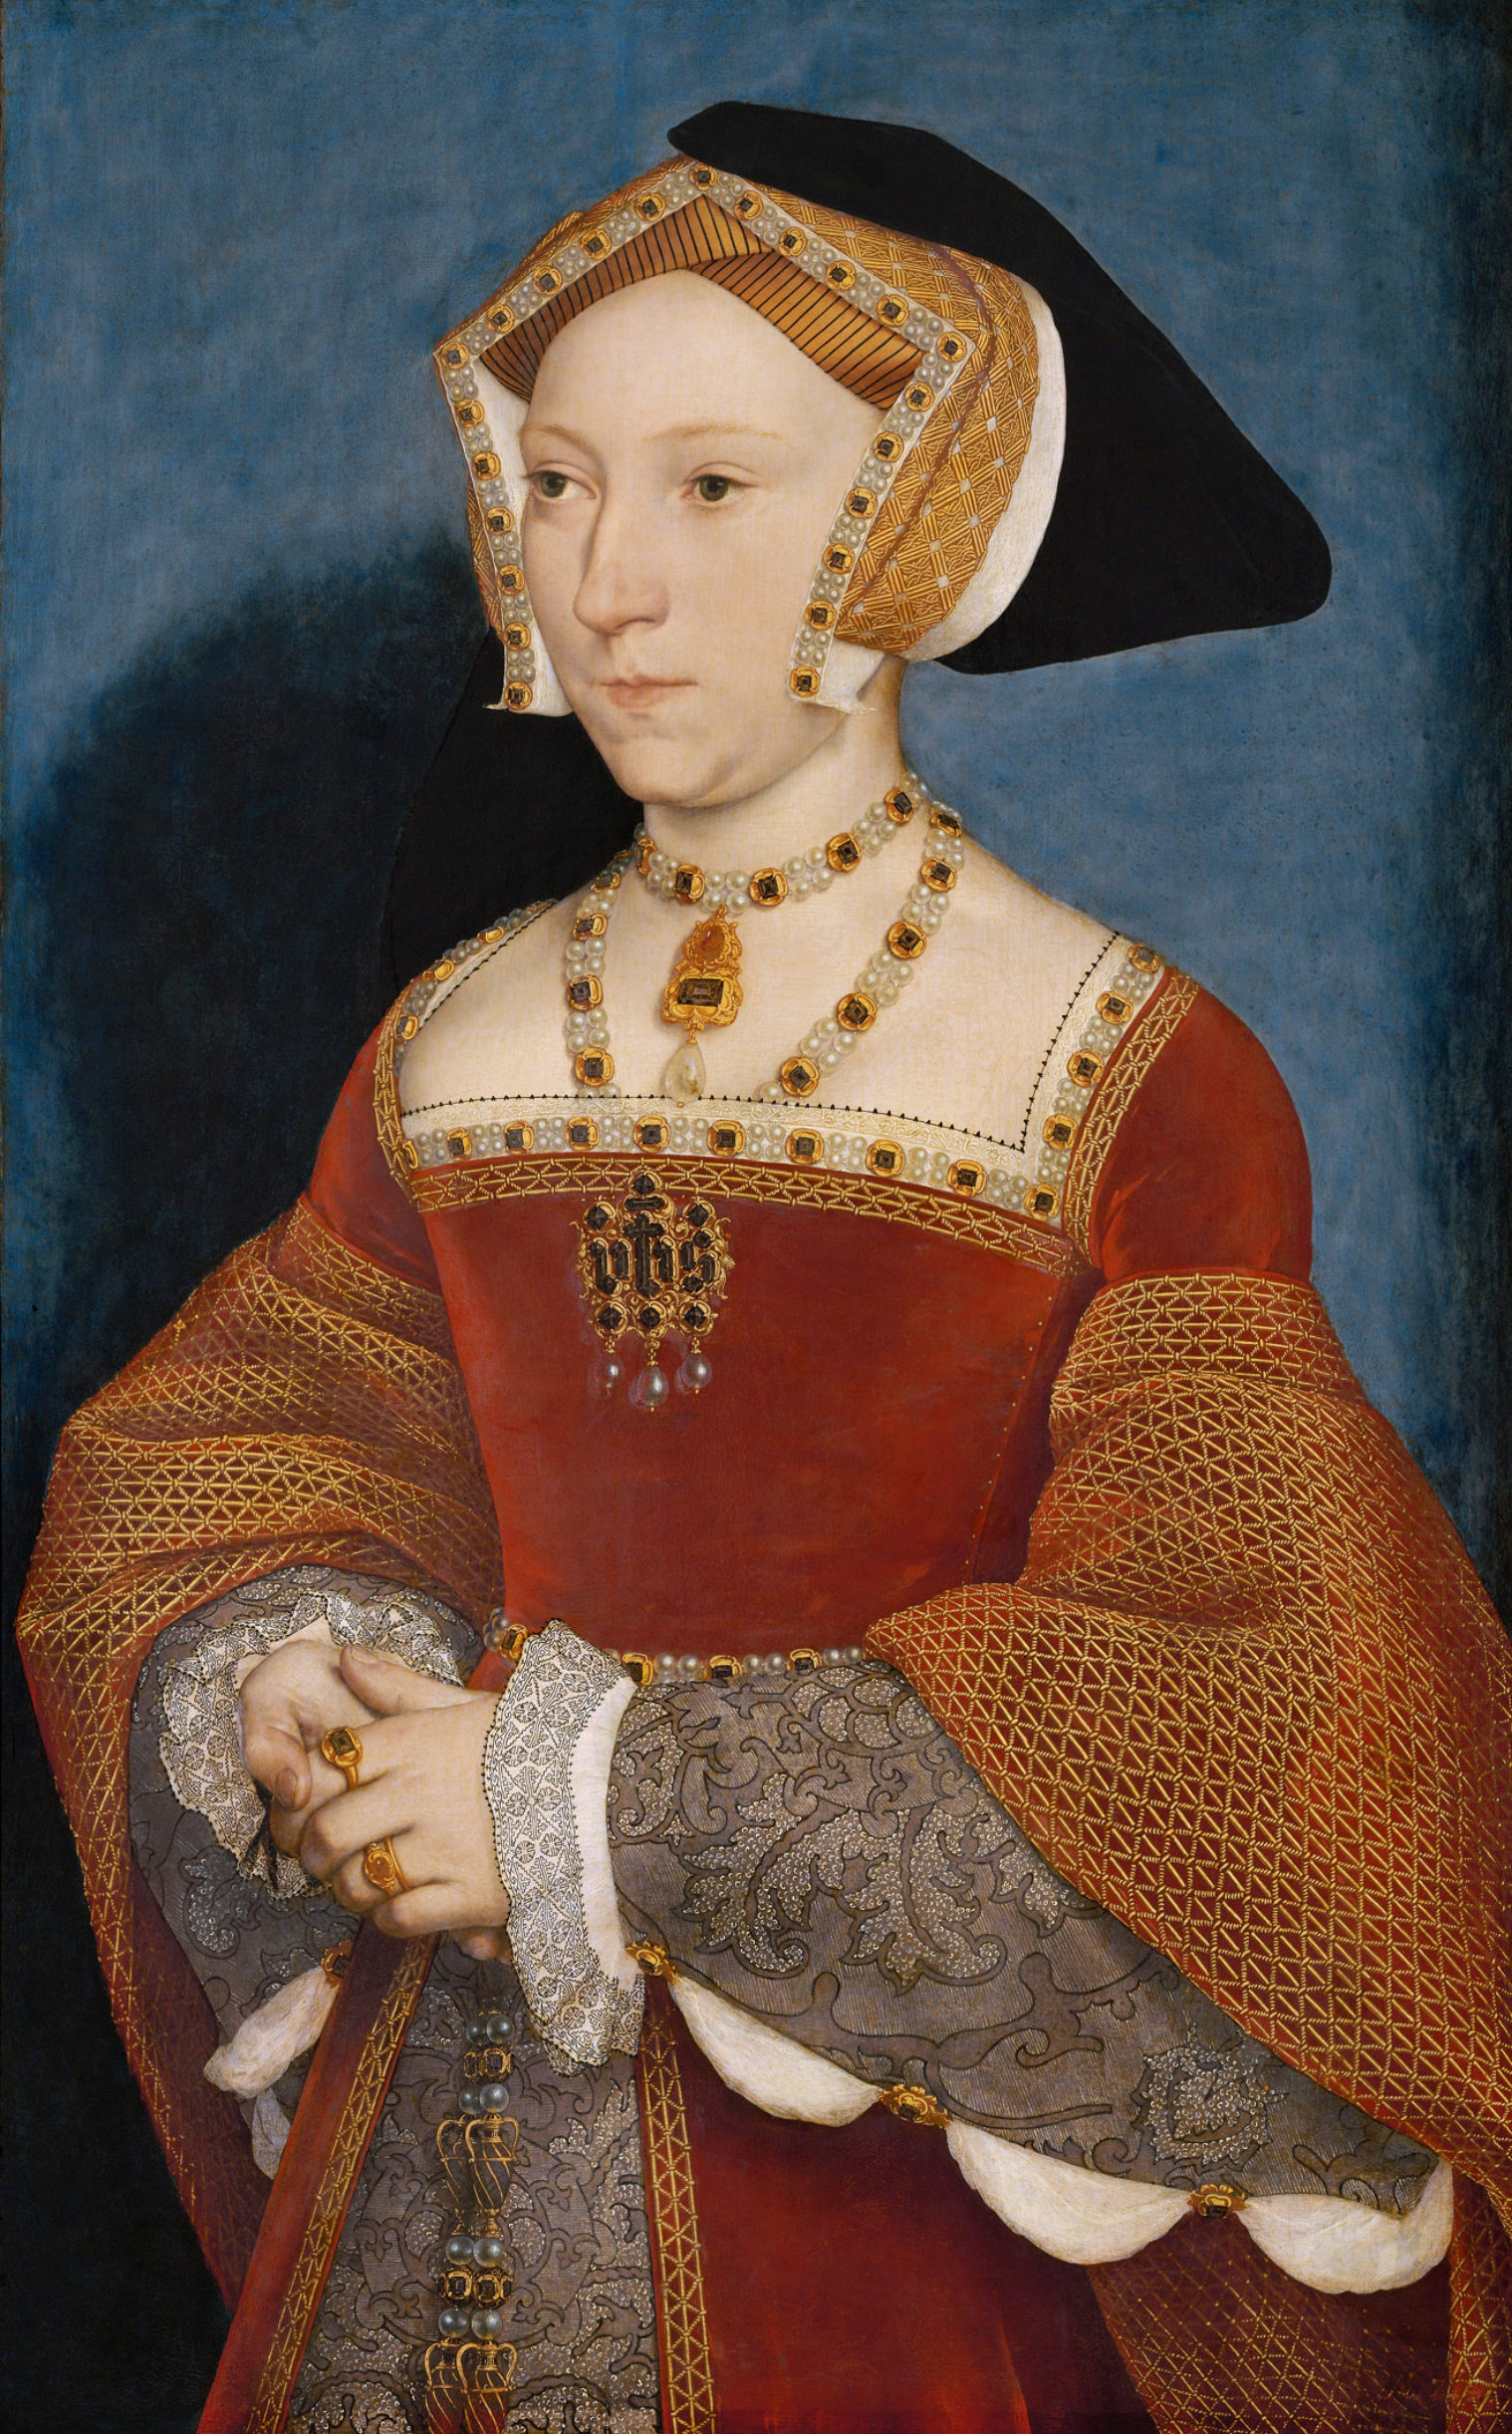 Hans Holbein the Younger: Jane Seymour, 1536/1537. Kunsthistorisches Museum.